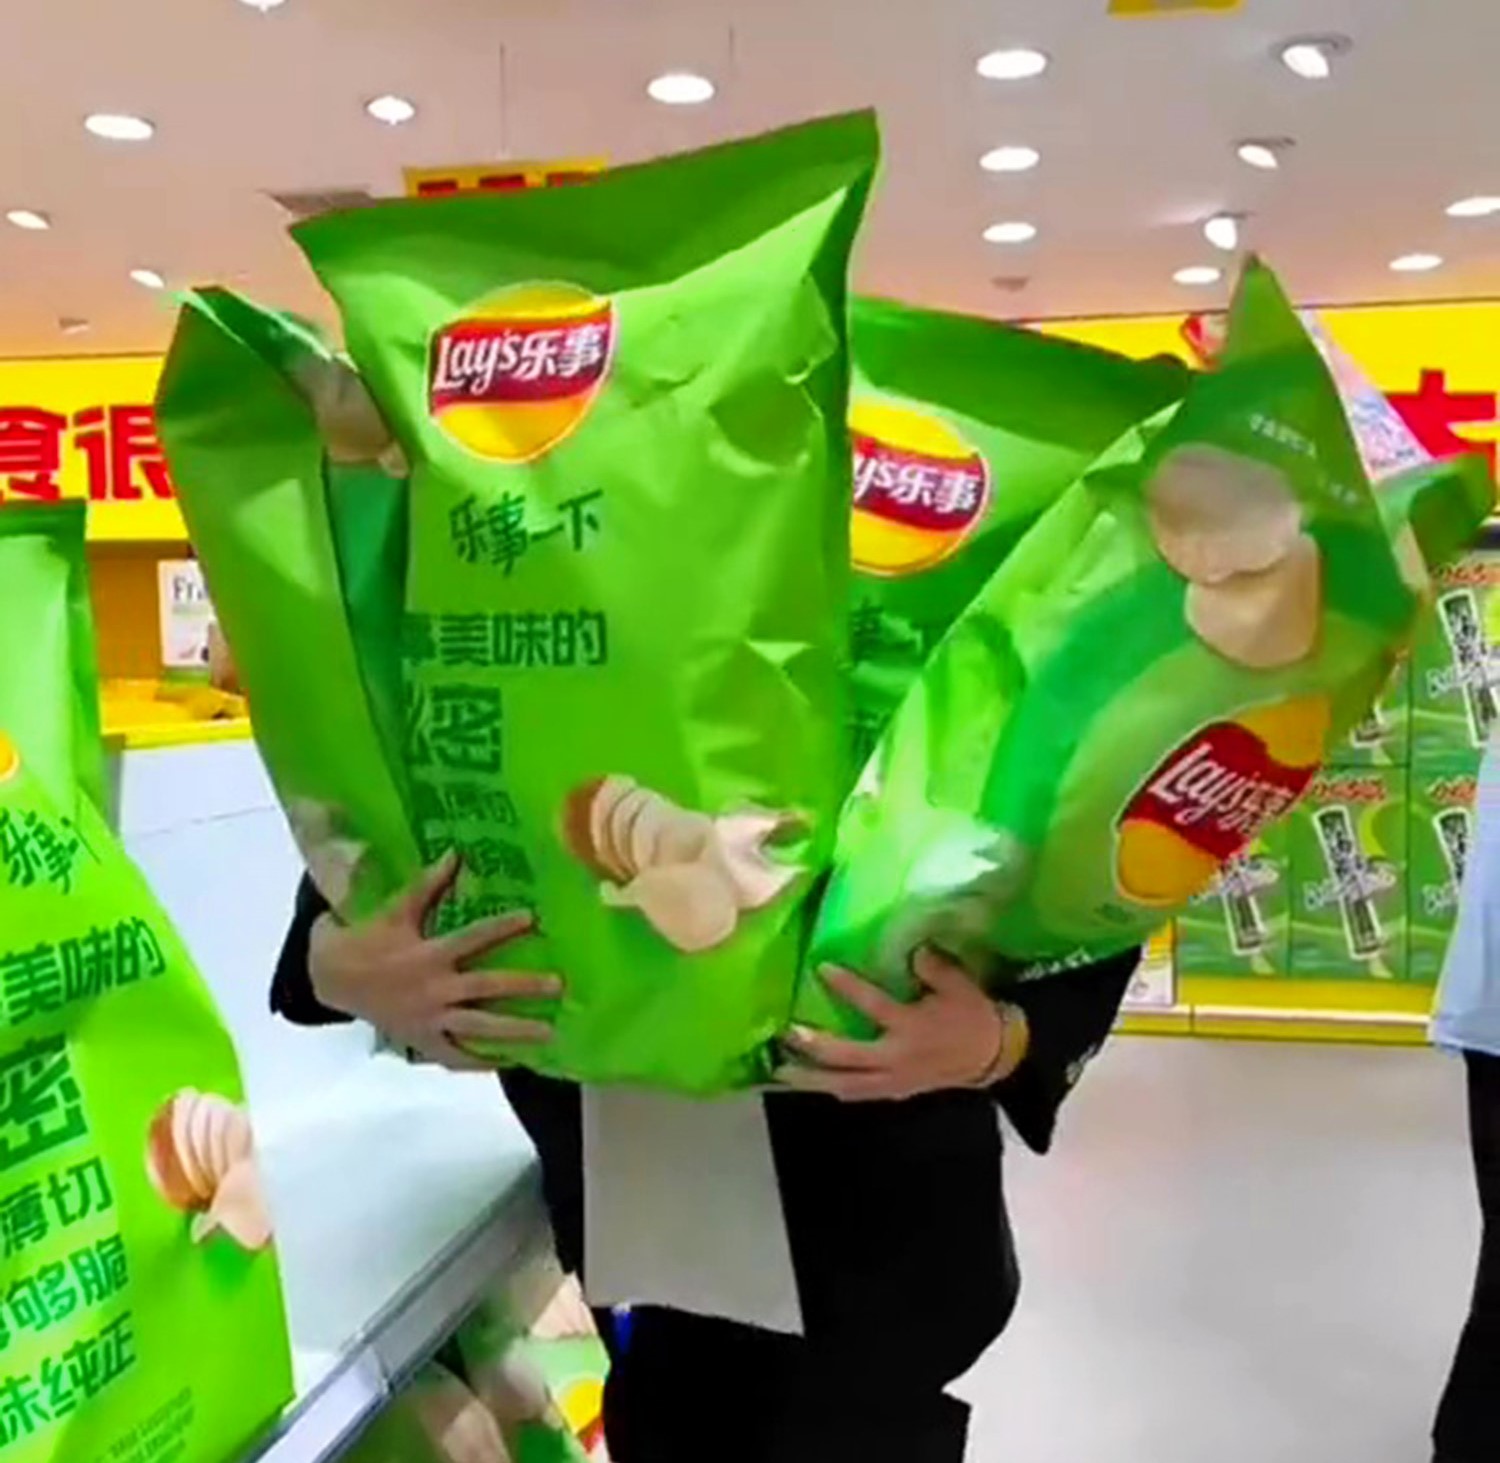 Discover a shop in China where snacks are supersized, attracting crowds for its gigantic treats like meter-long fizzy belts and colossal Oreo biscuits. Fans are amazed by the oversized portions, sparking viral excitement.